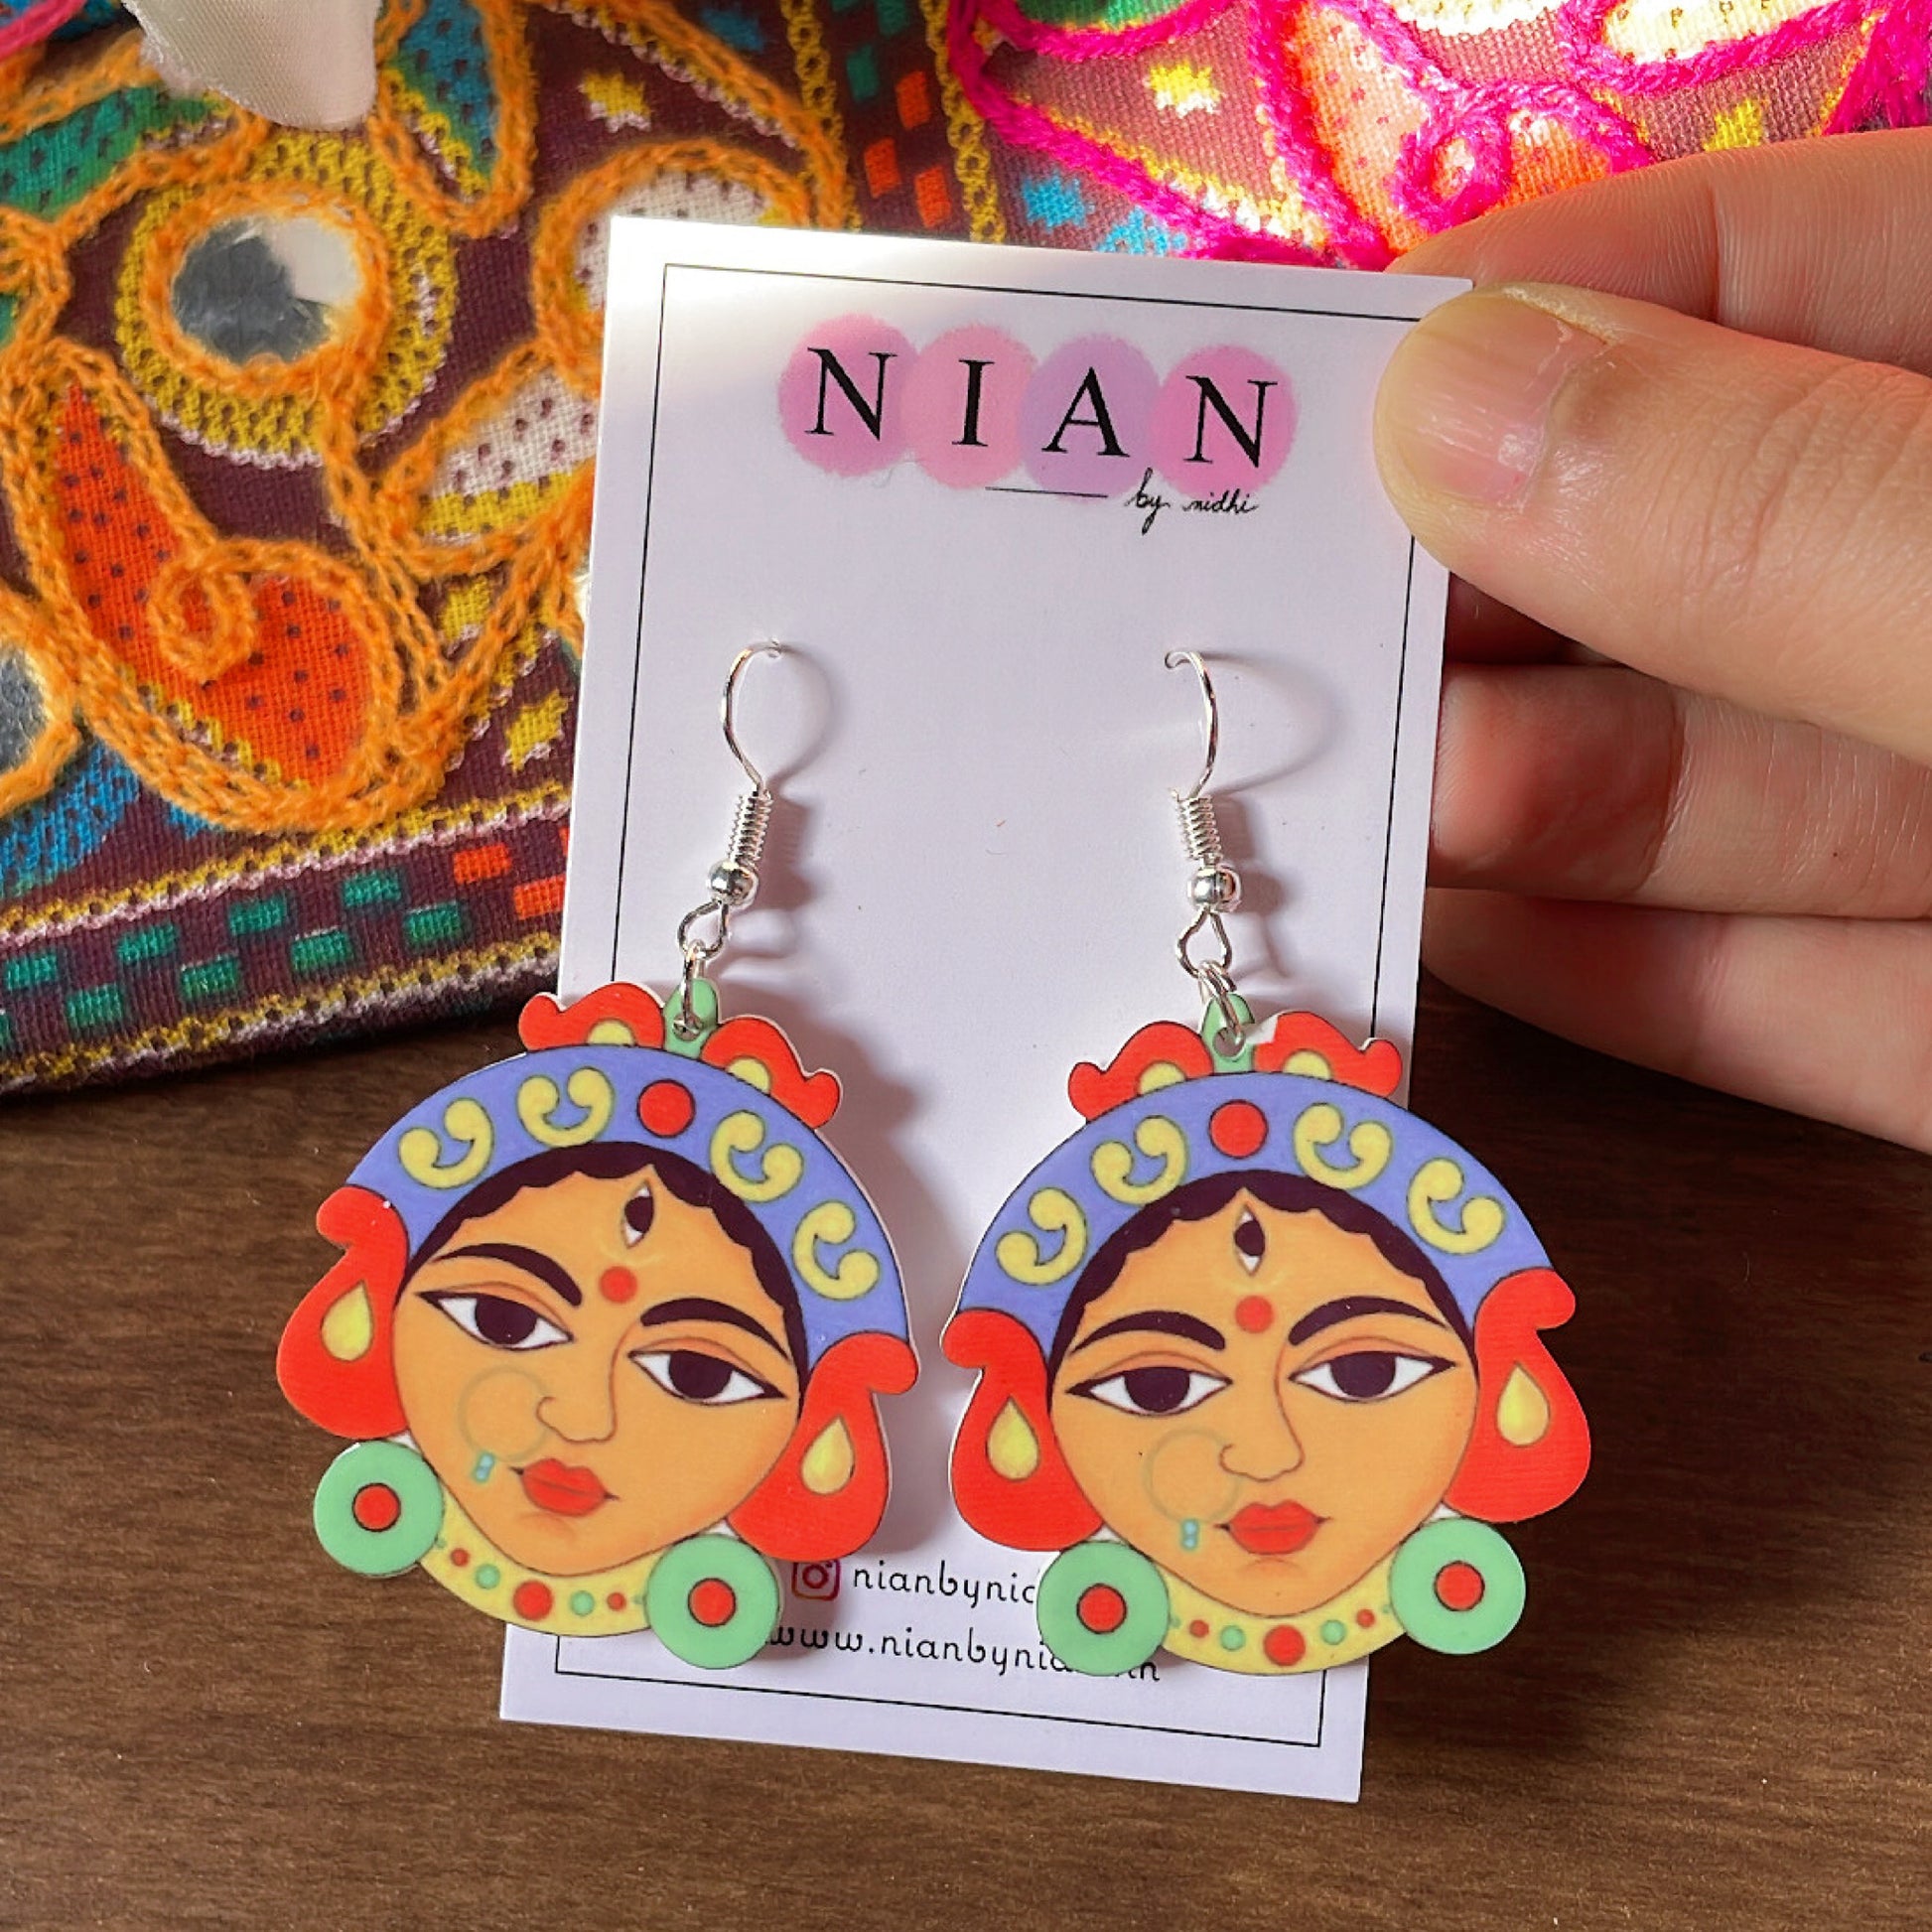 Durga Maa Earrings - Nian by Nidhi - Multicolor - held in a hand, placed in a colorful brown background